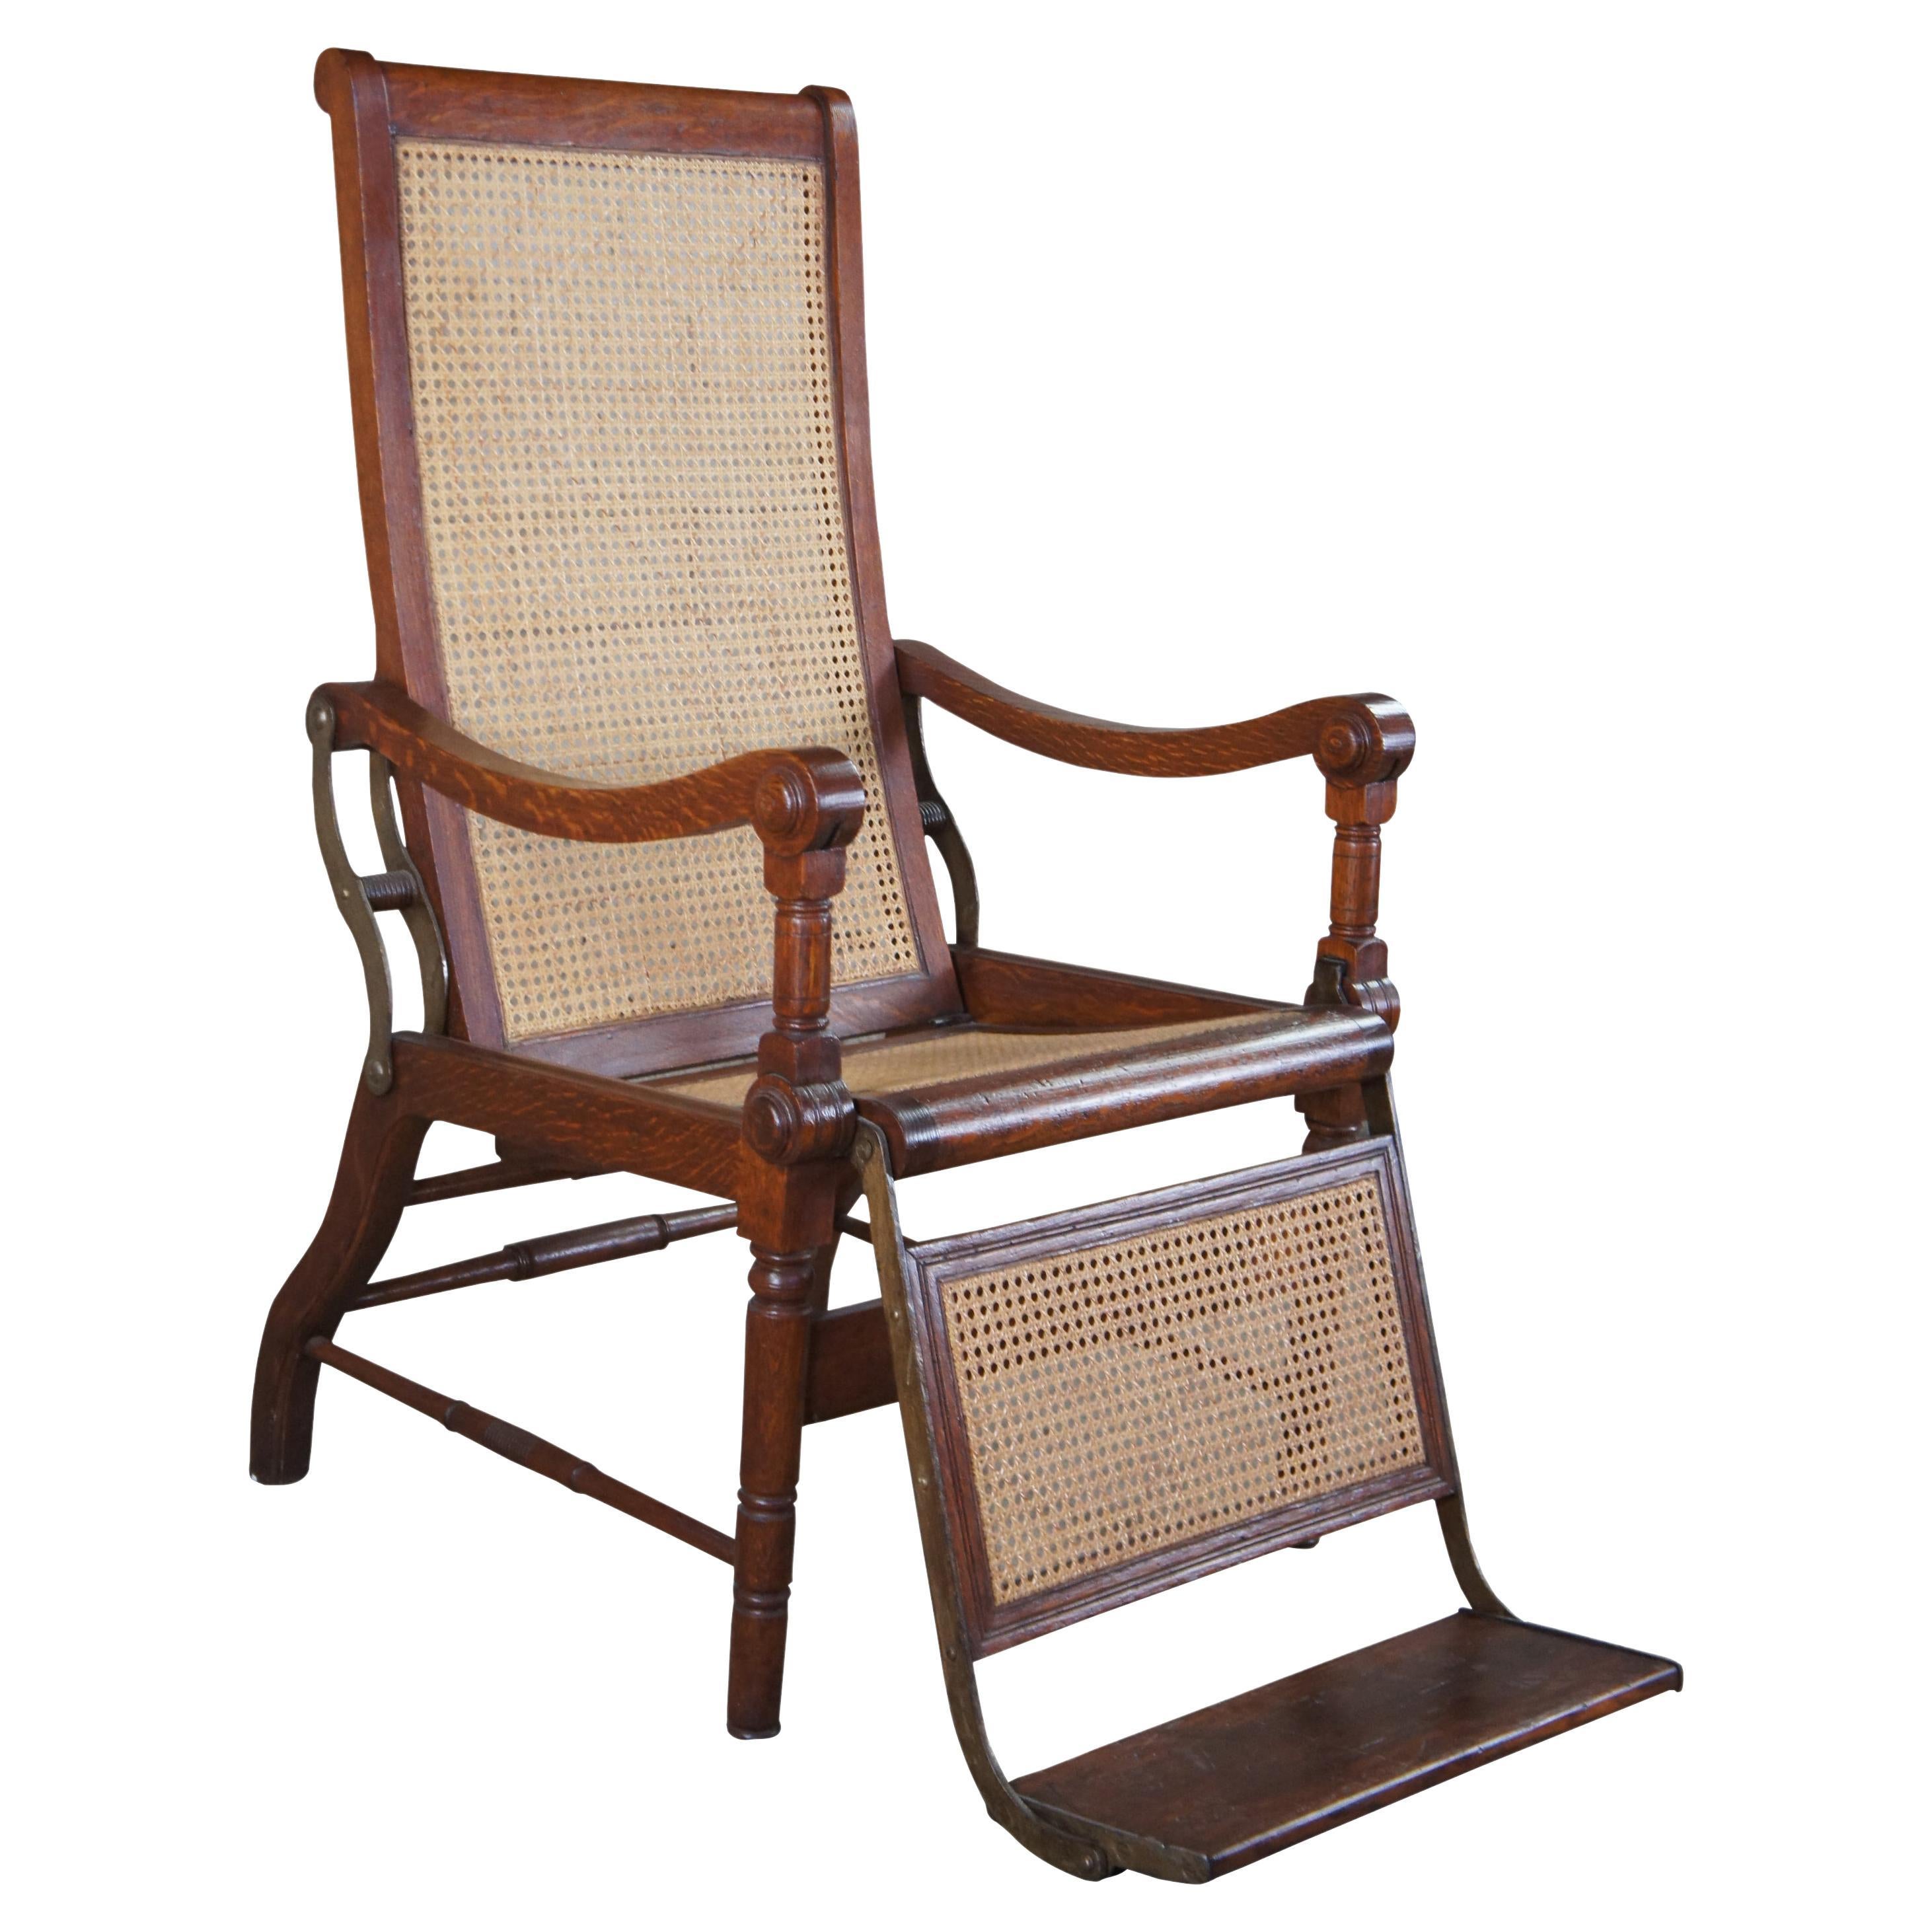 Antique British Colonial 1830s Caned Oak Reclining Mechanical Dental Arm Chair (fauteuil dentaire mécanique inclinable)